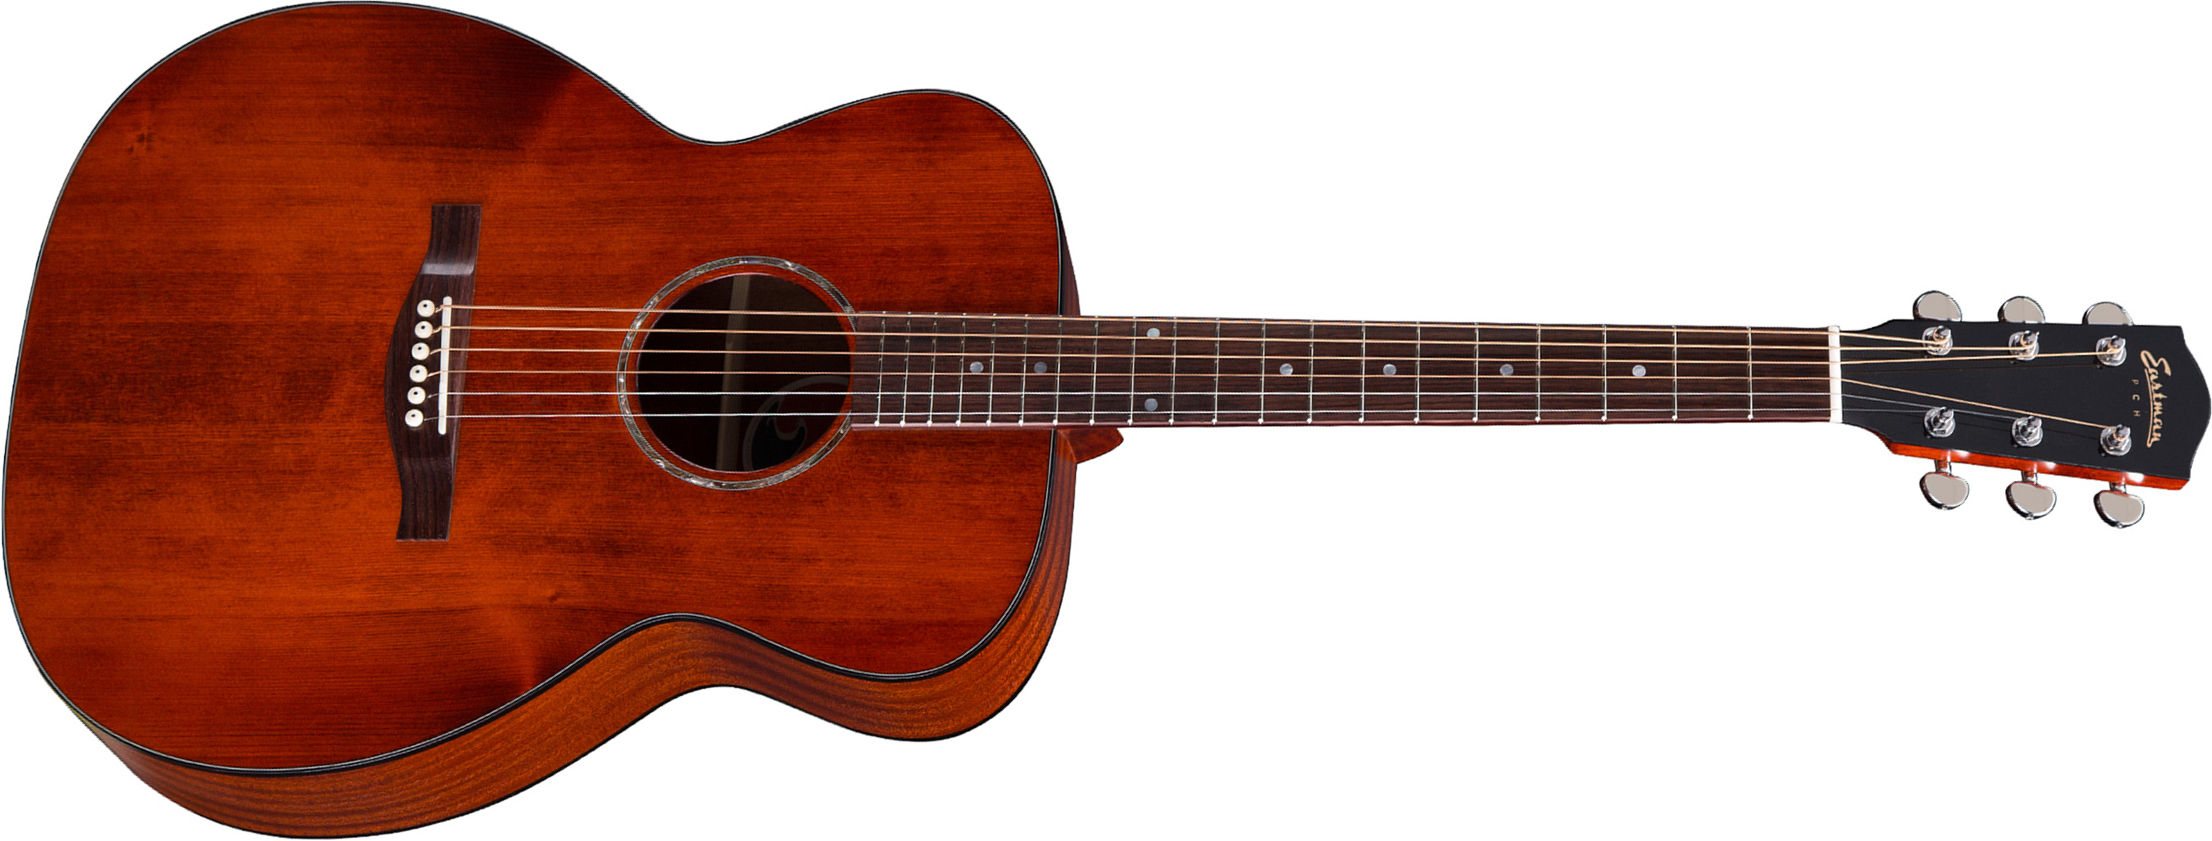 Eastman Pch1-om Orchestra Model Epicea Sapele Rw - Classic Satin - Electro acoustic guitar - Main picture